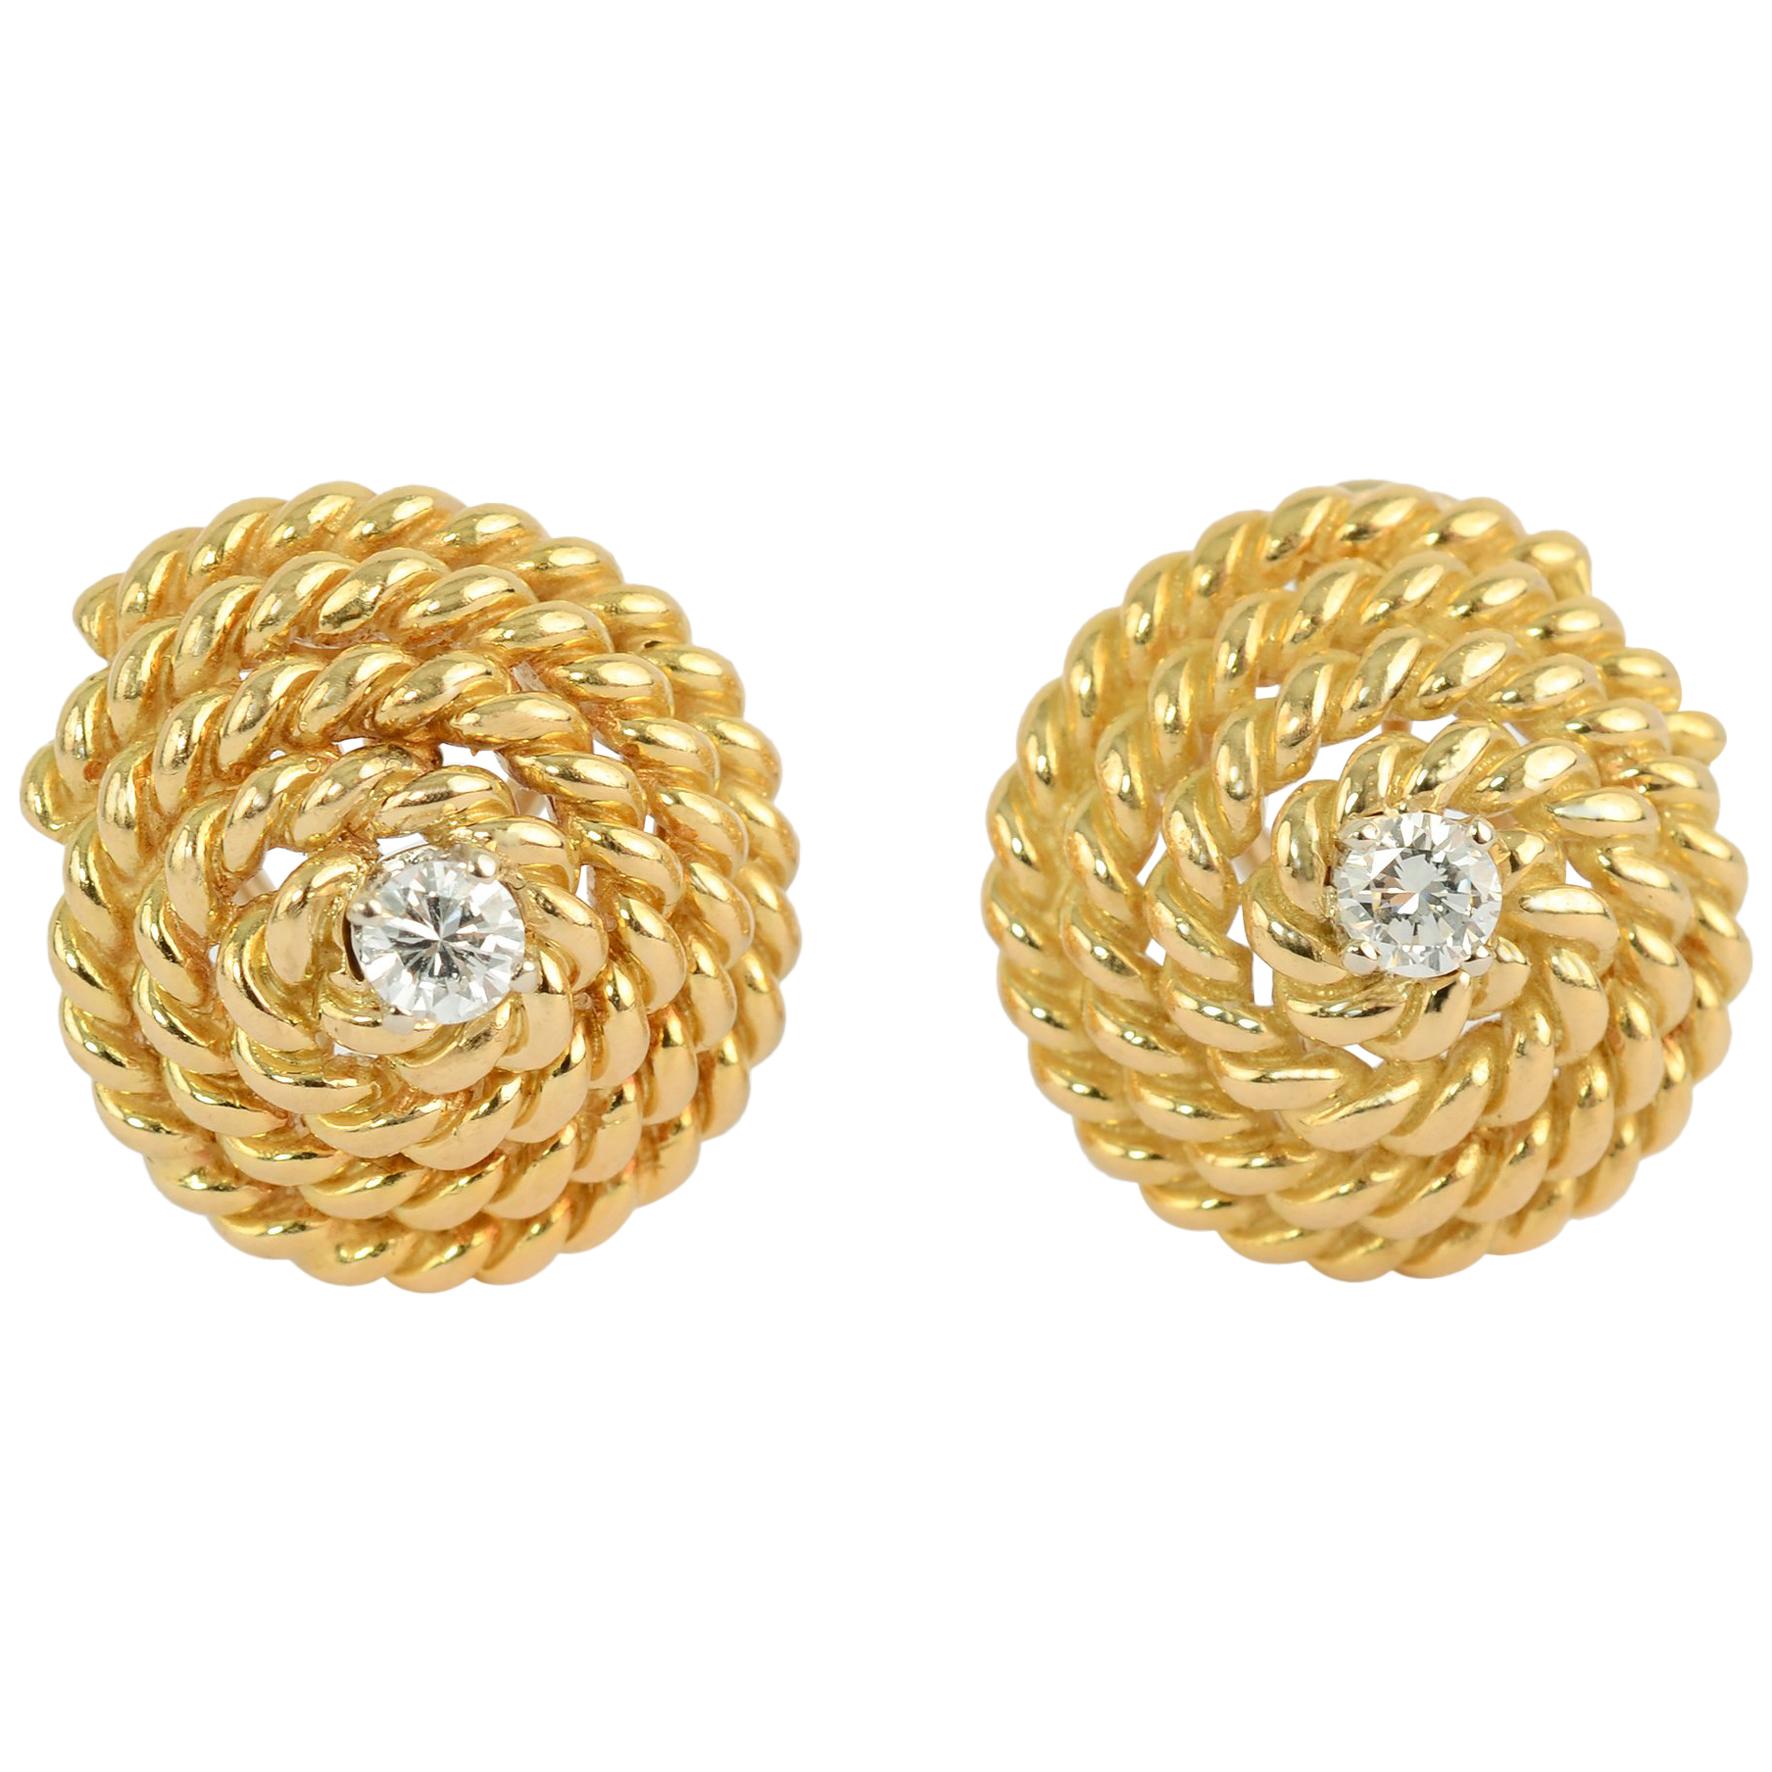 Tiffany Gold Coil Earrings with Centre Diamond For Sale